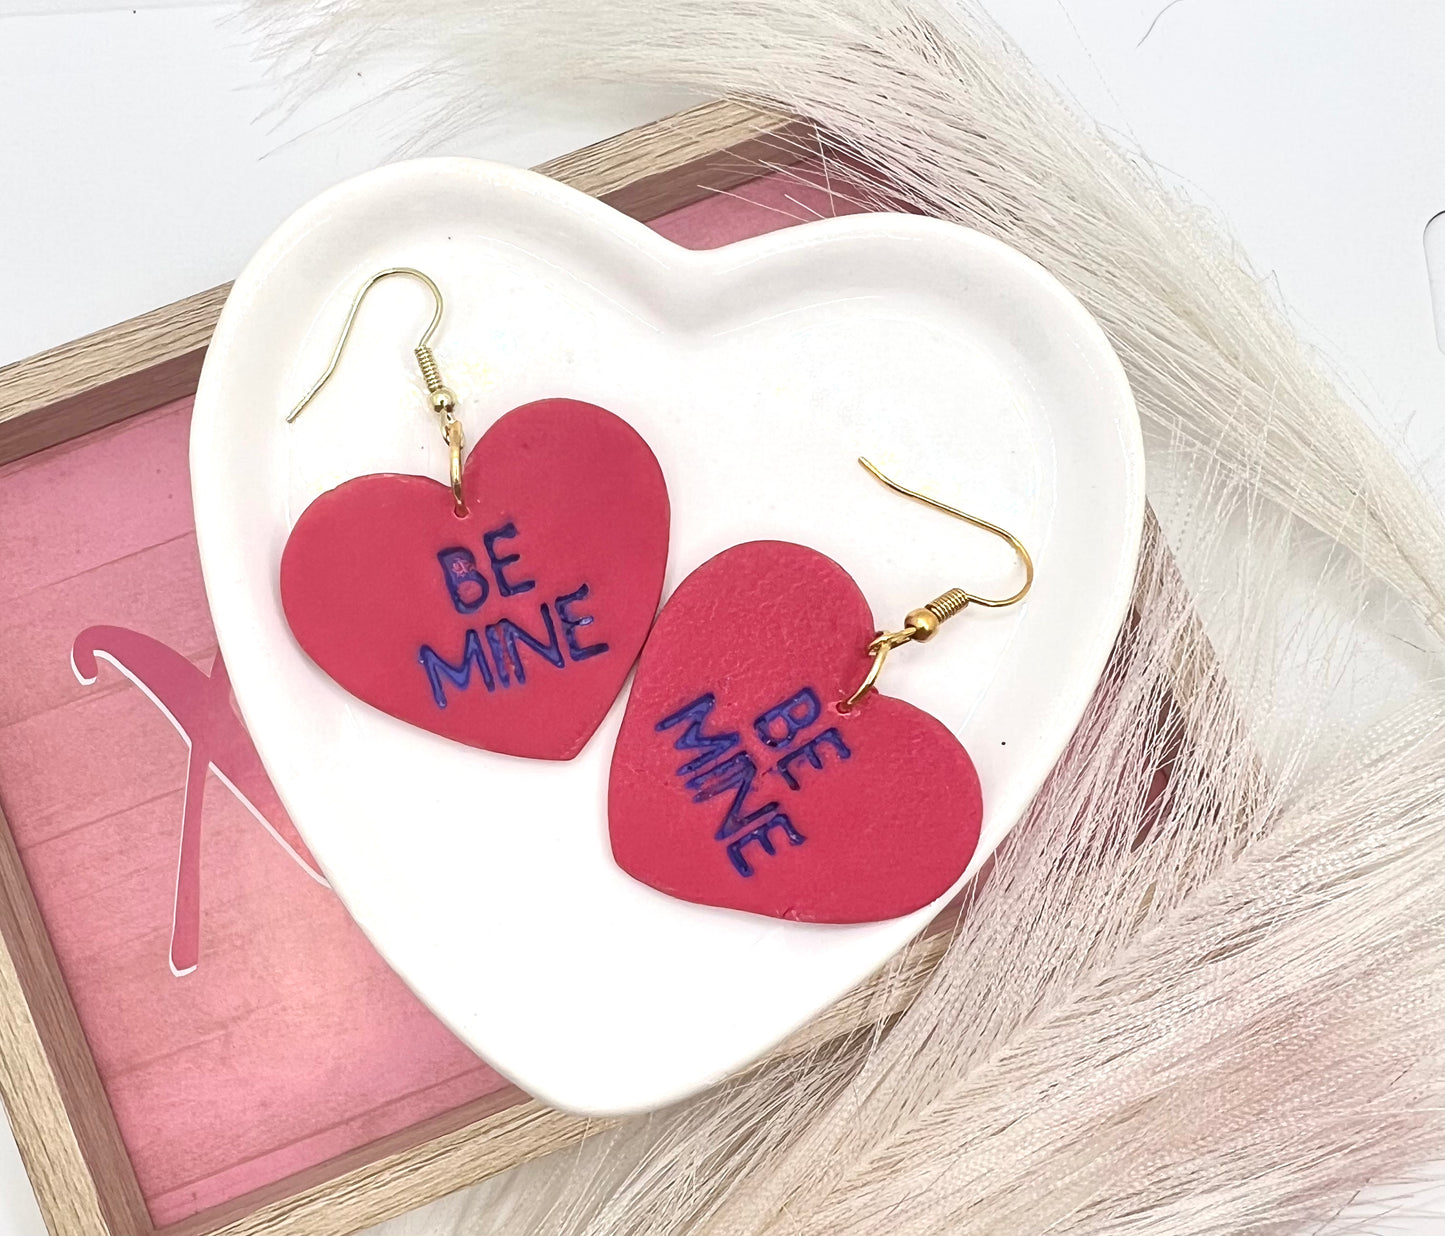 heart shaped earrings stamped with be mine in purple and on gold fish hook style earrings.